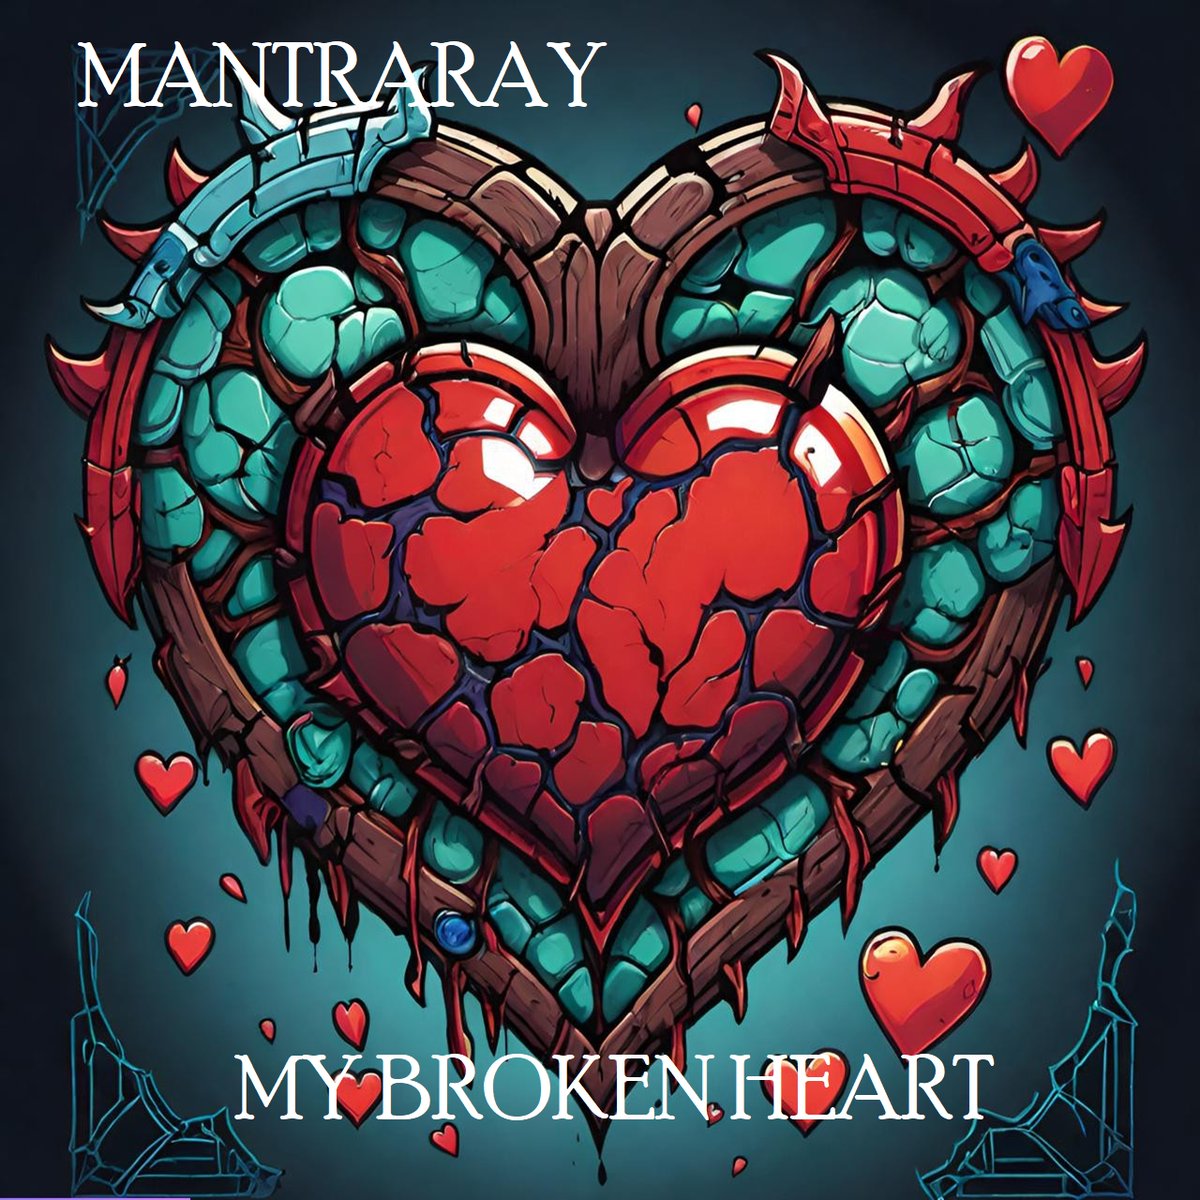 It's #NewMusicFriday and we're delighted to be streaming #newmusic from @MantraRay2 with two new tracks, don't miss 'MY BROKEN HEART' coming up in about ten minutes 10:03 UK time mostrated.com We build playlists daily of the most rated #indie music, check it out!